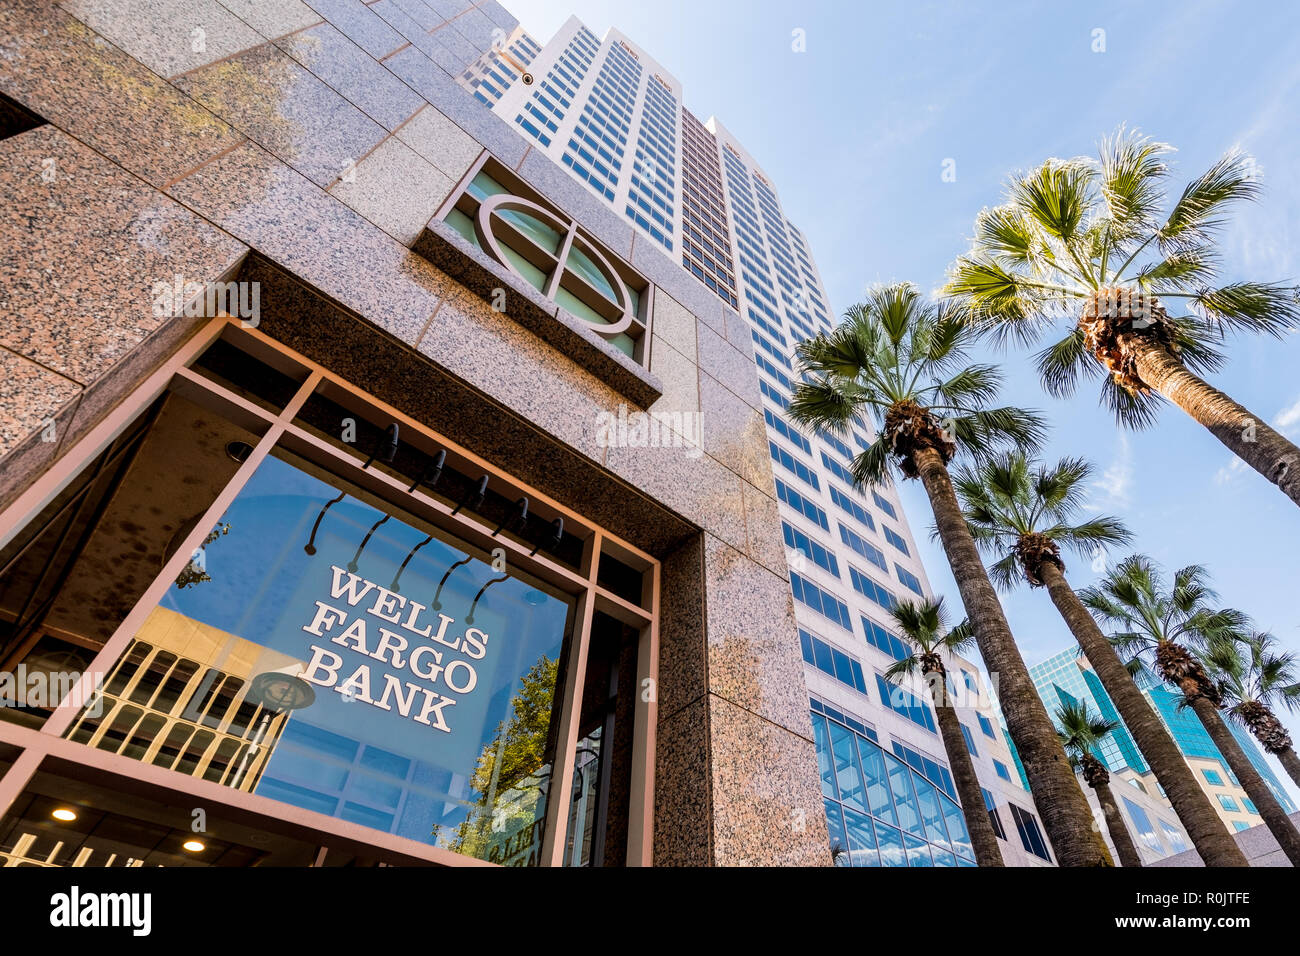 September 22, 2018 Sacramento / CA / USA - Wells Fargo Bank branch located in the Wells Fargo Center (the tallest building in the city) Stock Photo